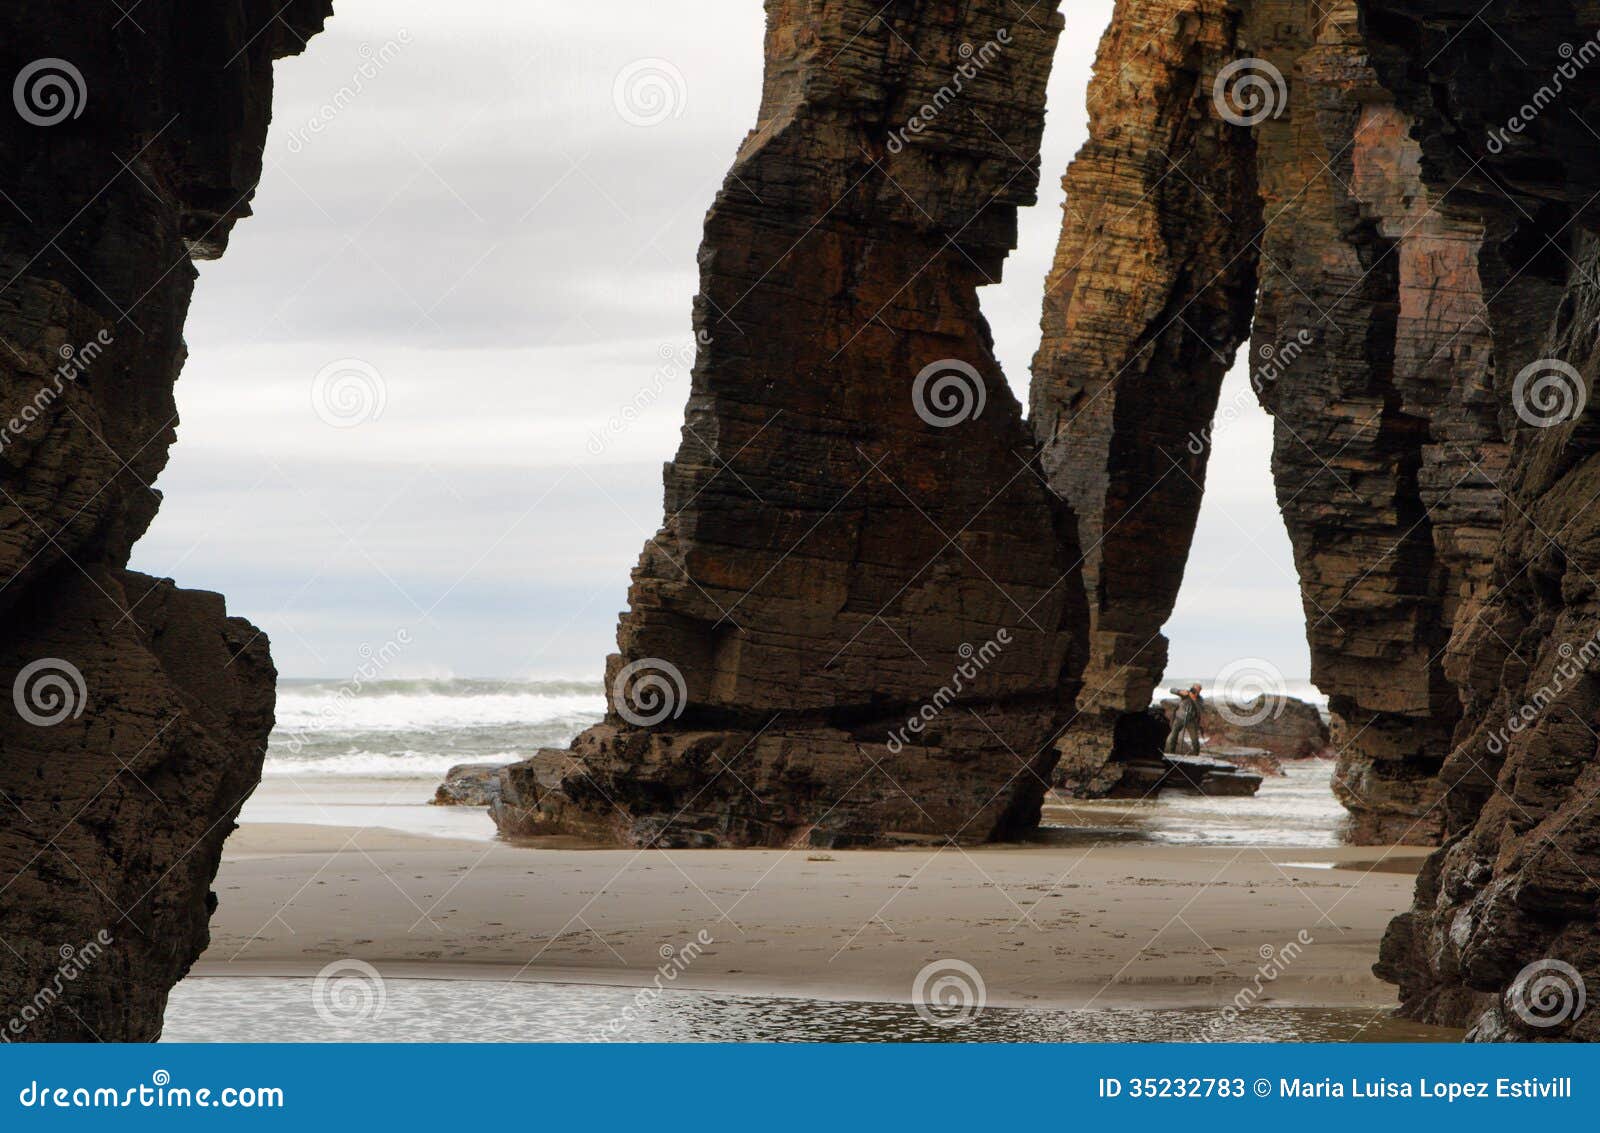 beach of the cathedrals in ribadeo, spain